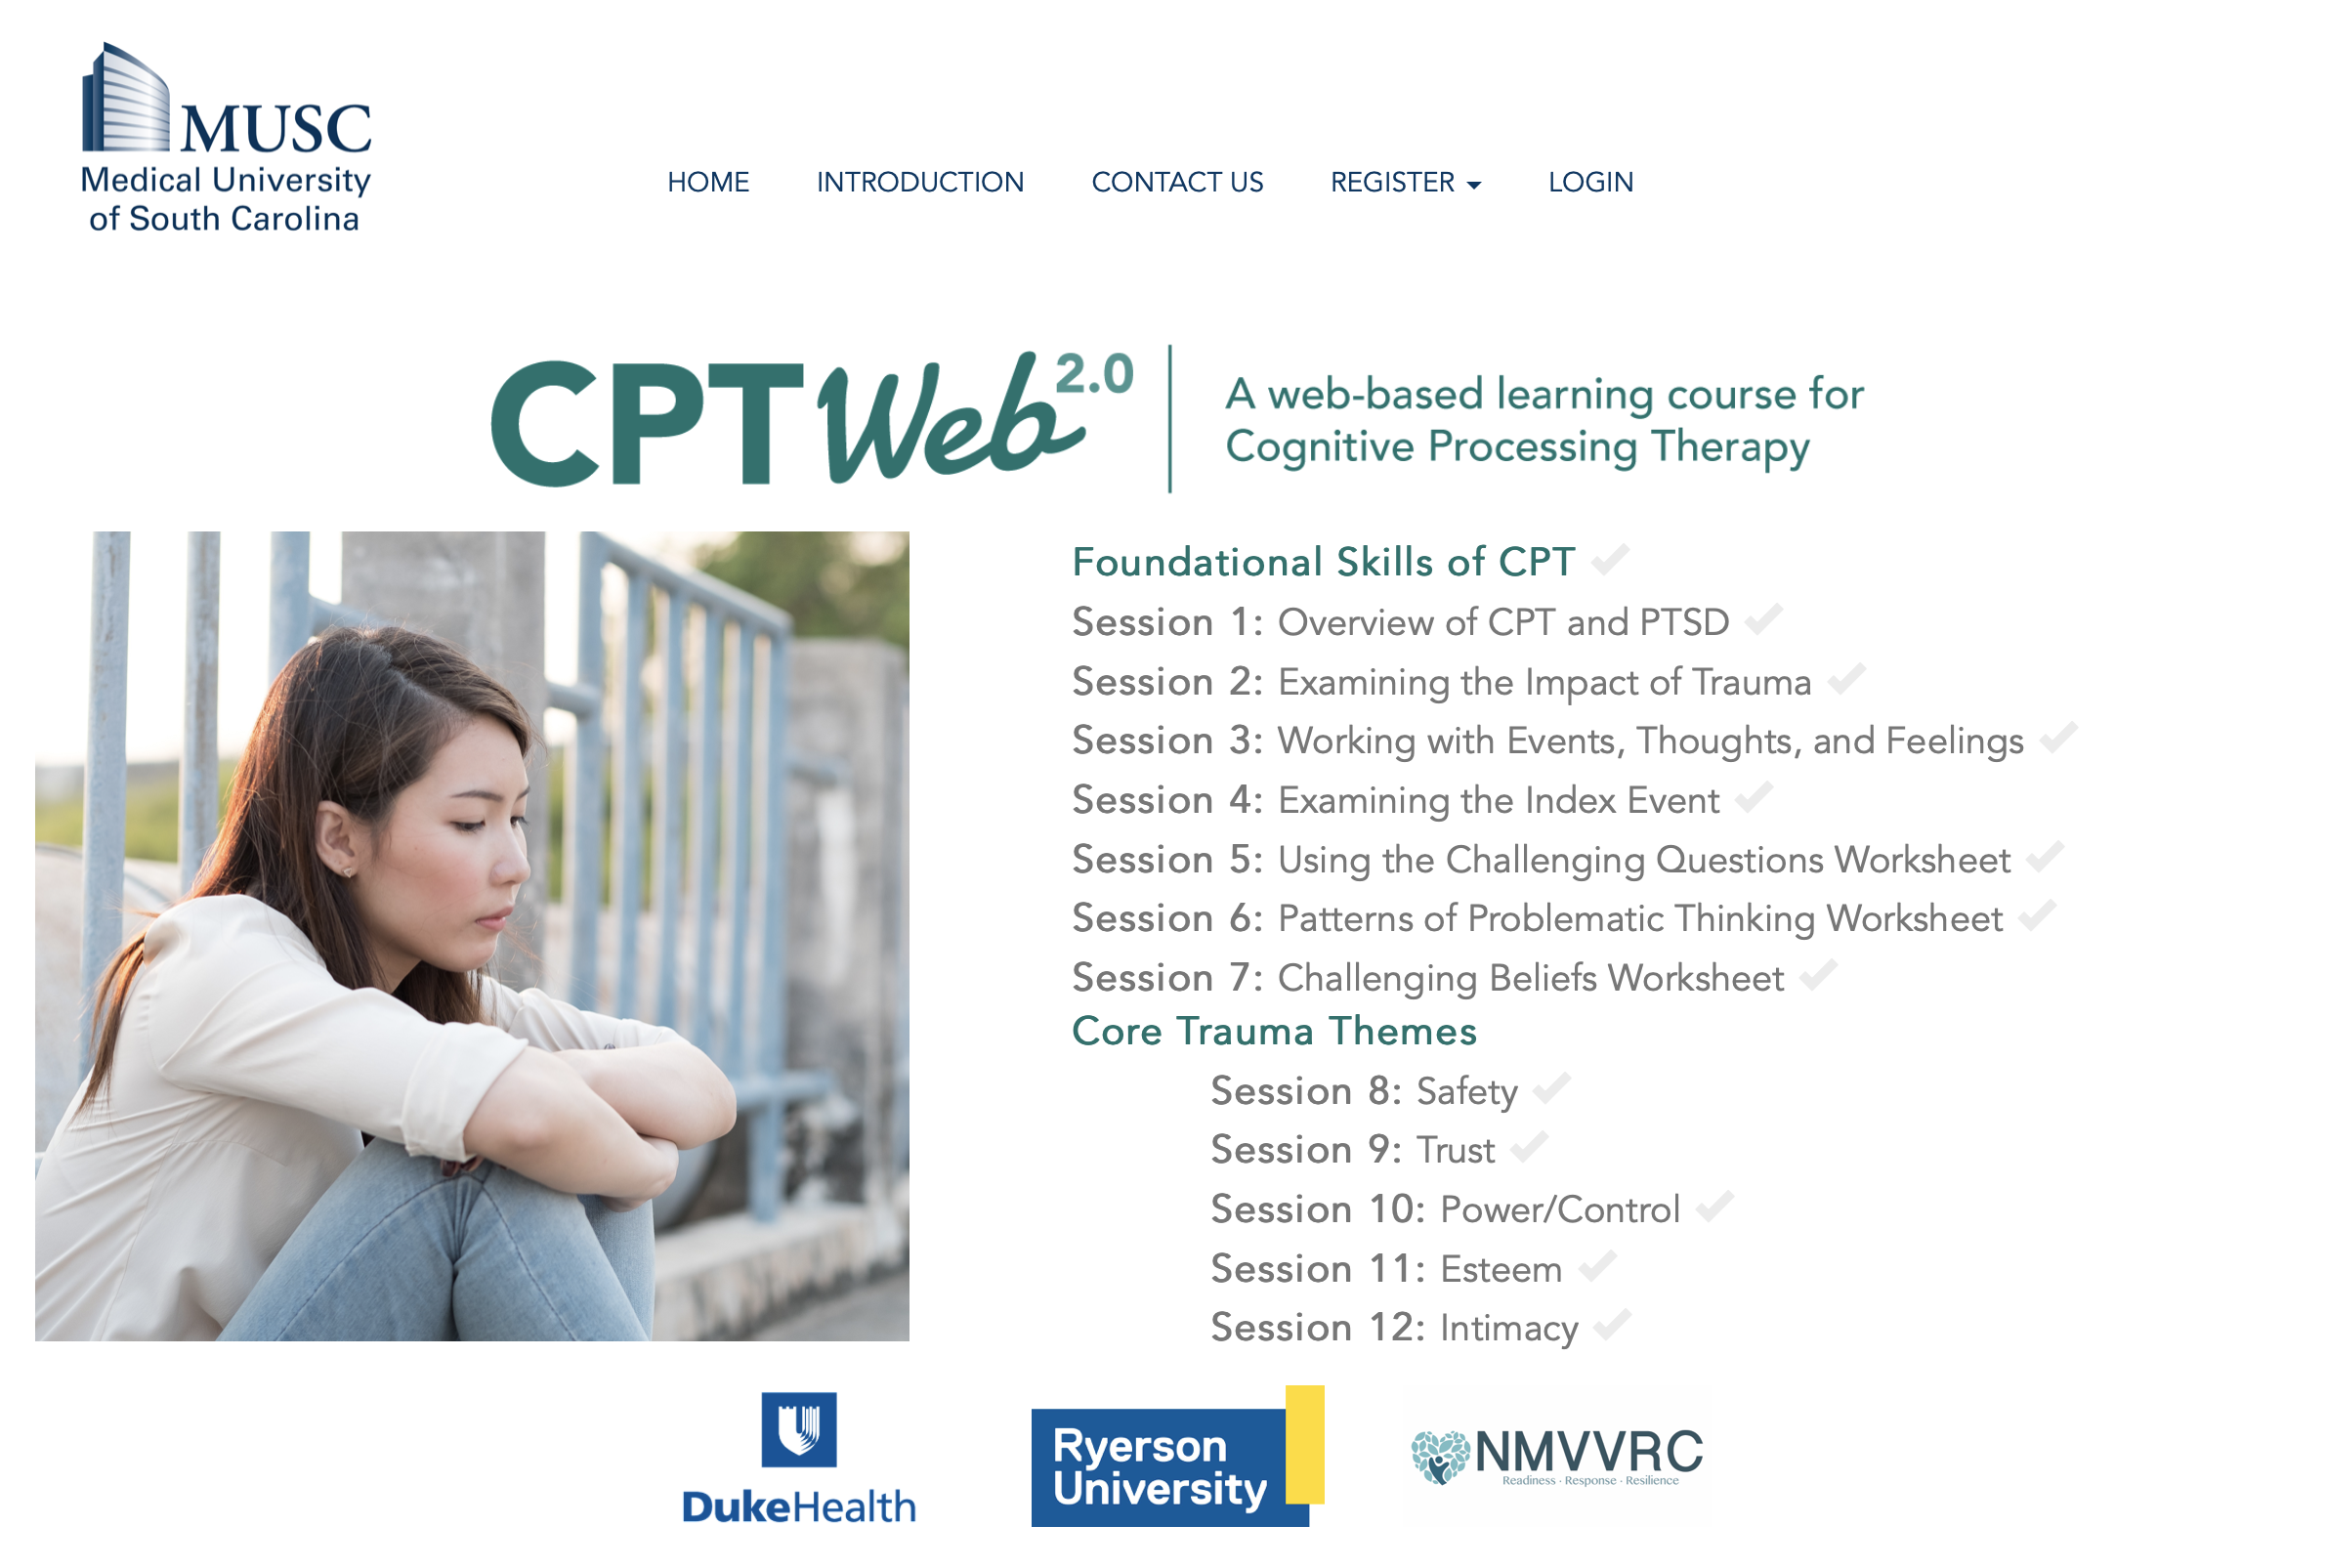 Screenshot of the homepage of the online training course, CPTWeb2.0, for learning Cognitive Processing Therapy for PTSD.